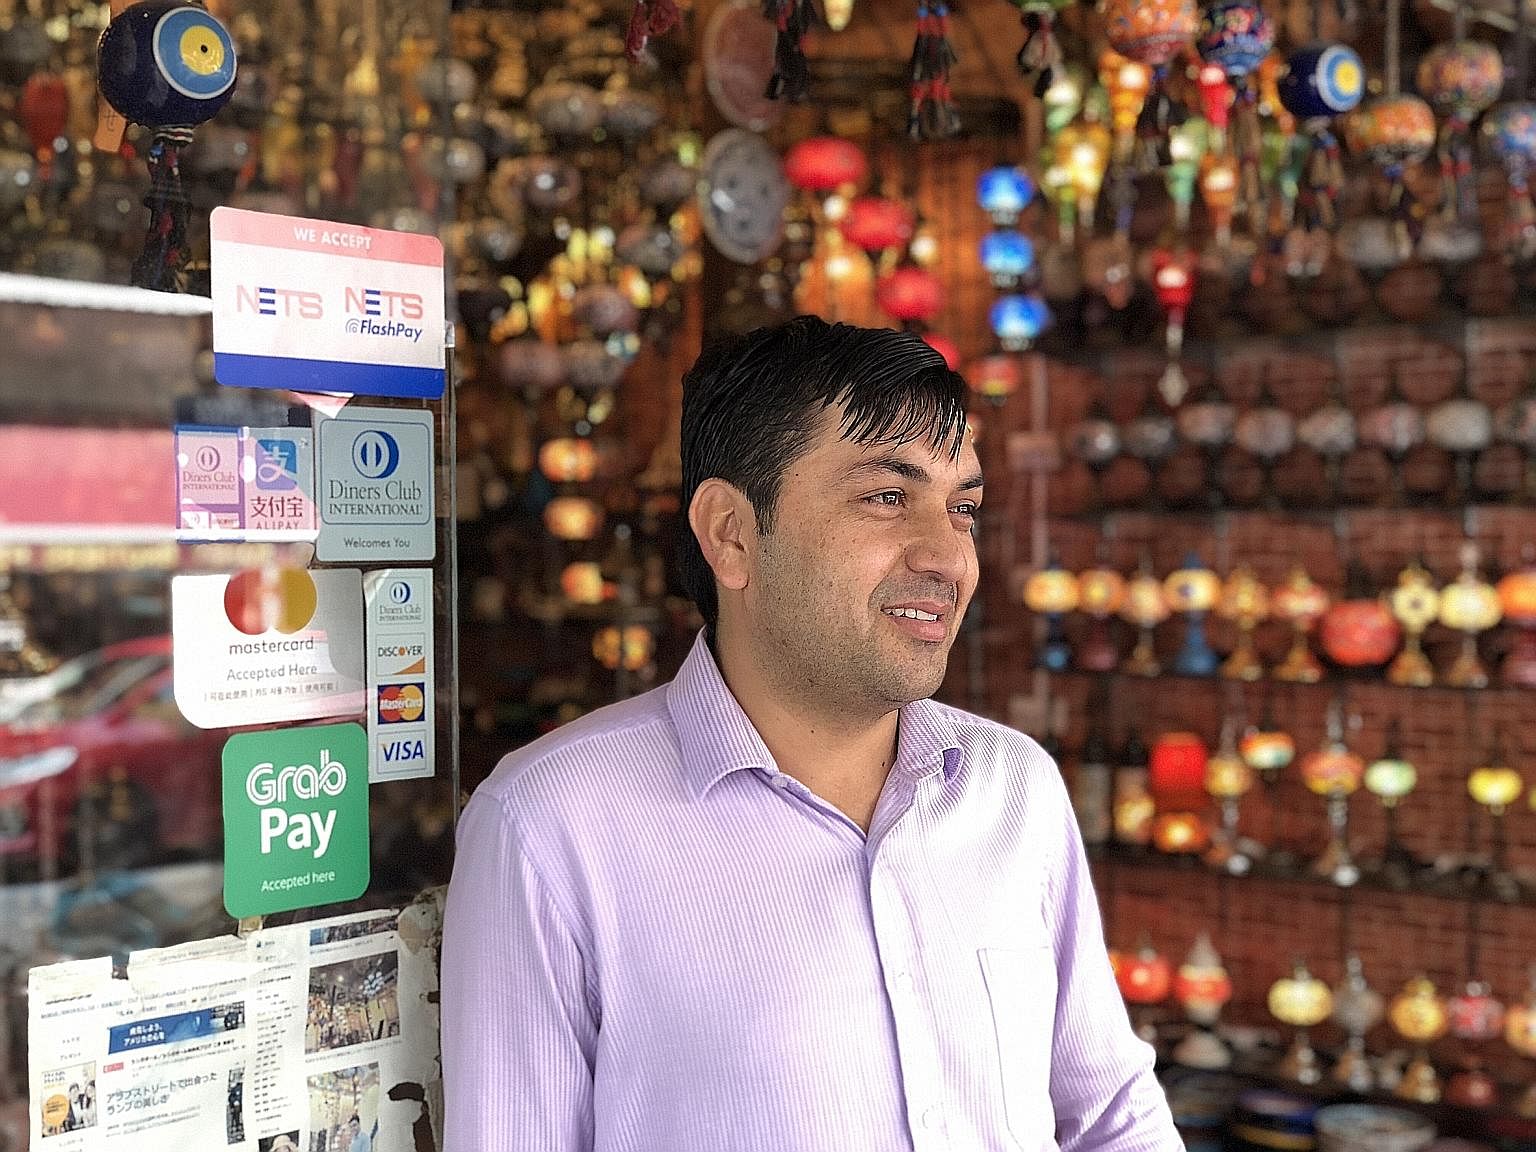 Mr Faizullah Saadullah operates family-owned retail shop Sufi Trading, which has used the GrabPay platform for three months and adopted Alipay recently. Mr Faizullah says the Alipay platform allows the Arab Street shop, which sells Turkish lamps, han